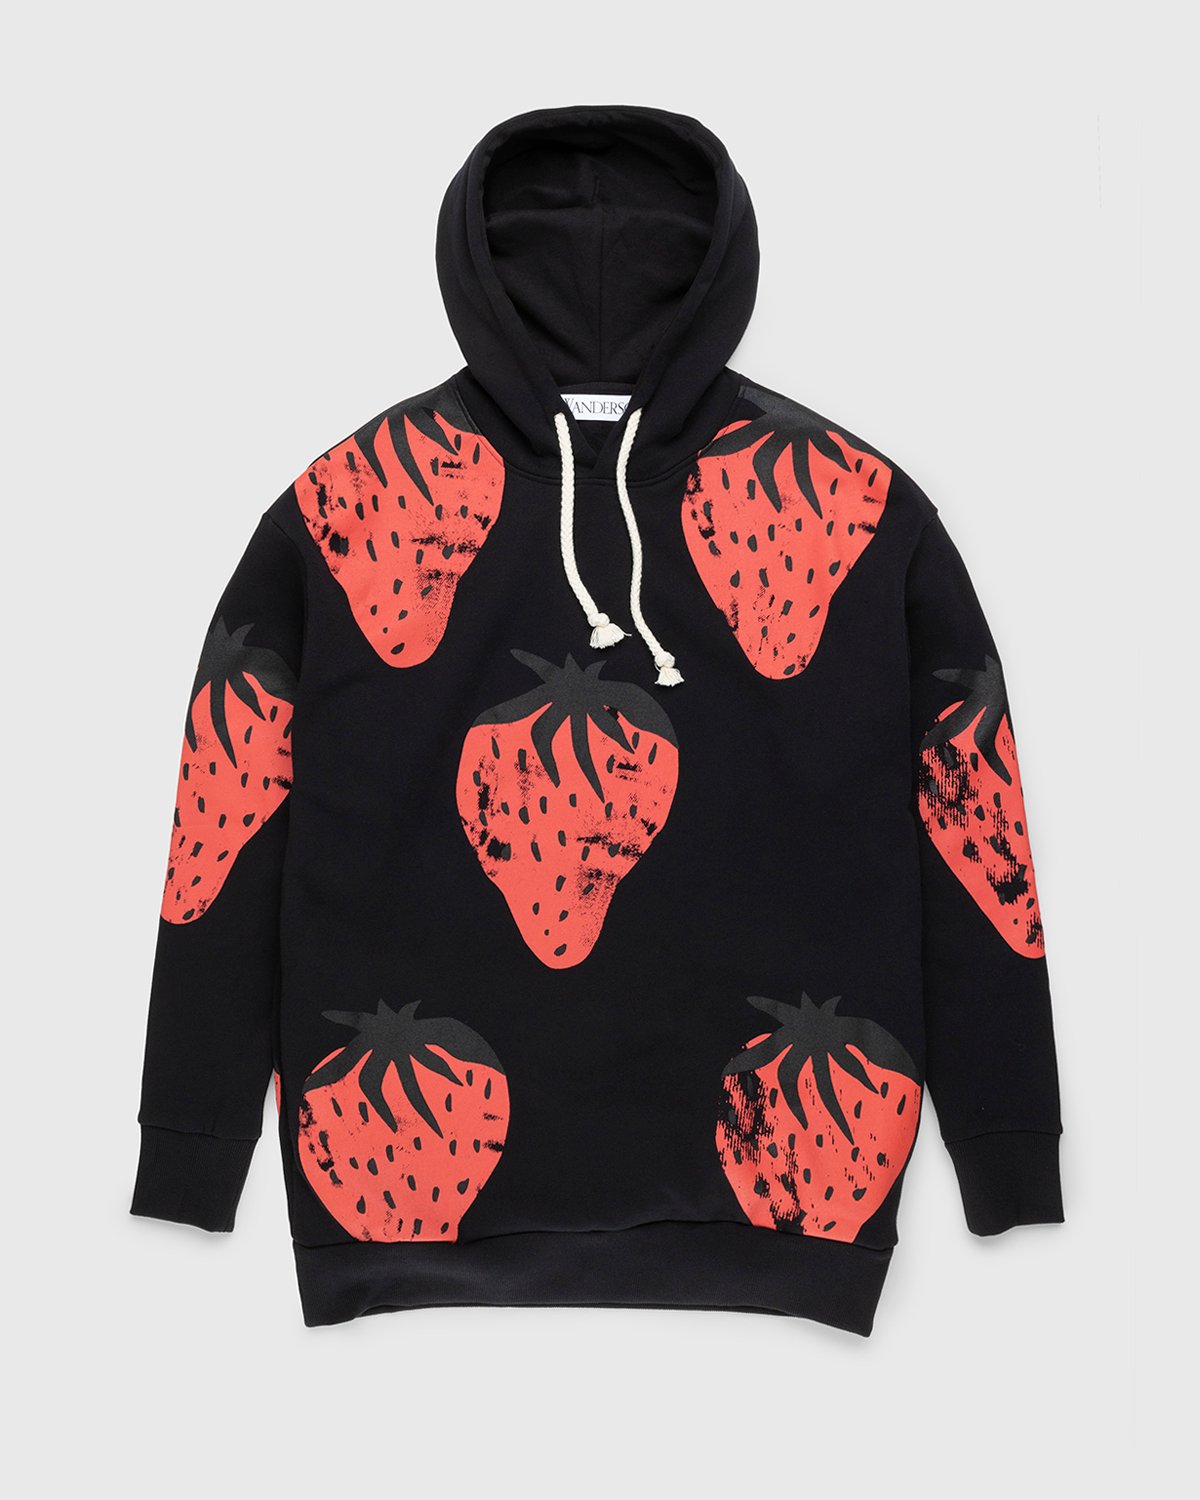 J.W. Anderson - Oversized Strawberry Hoodie Black/Red - Clothing - Black - Image 1